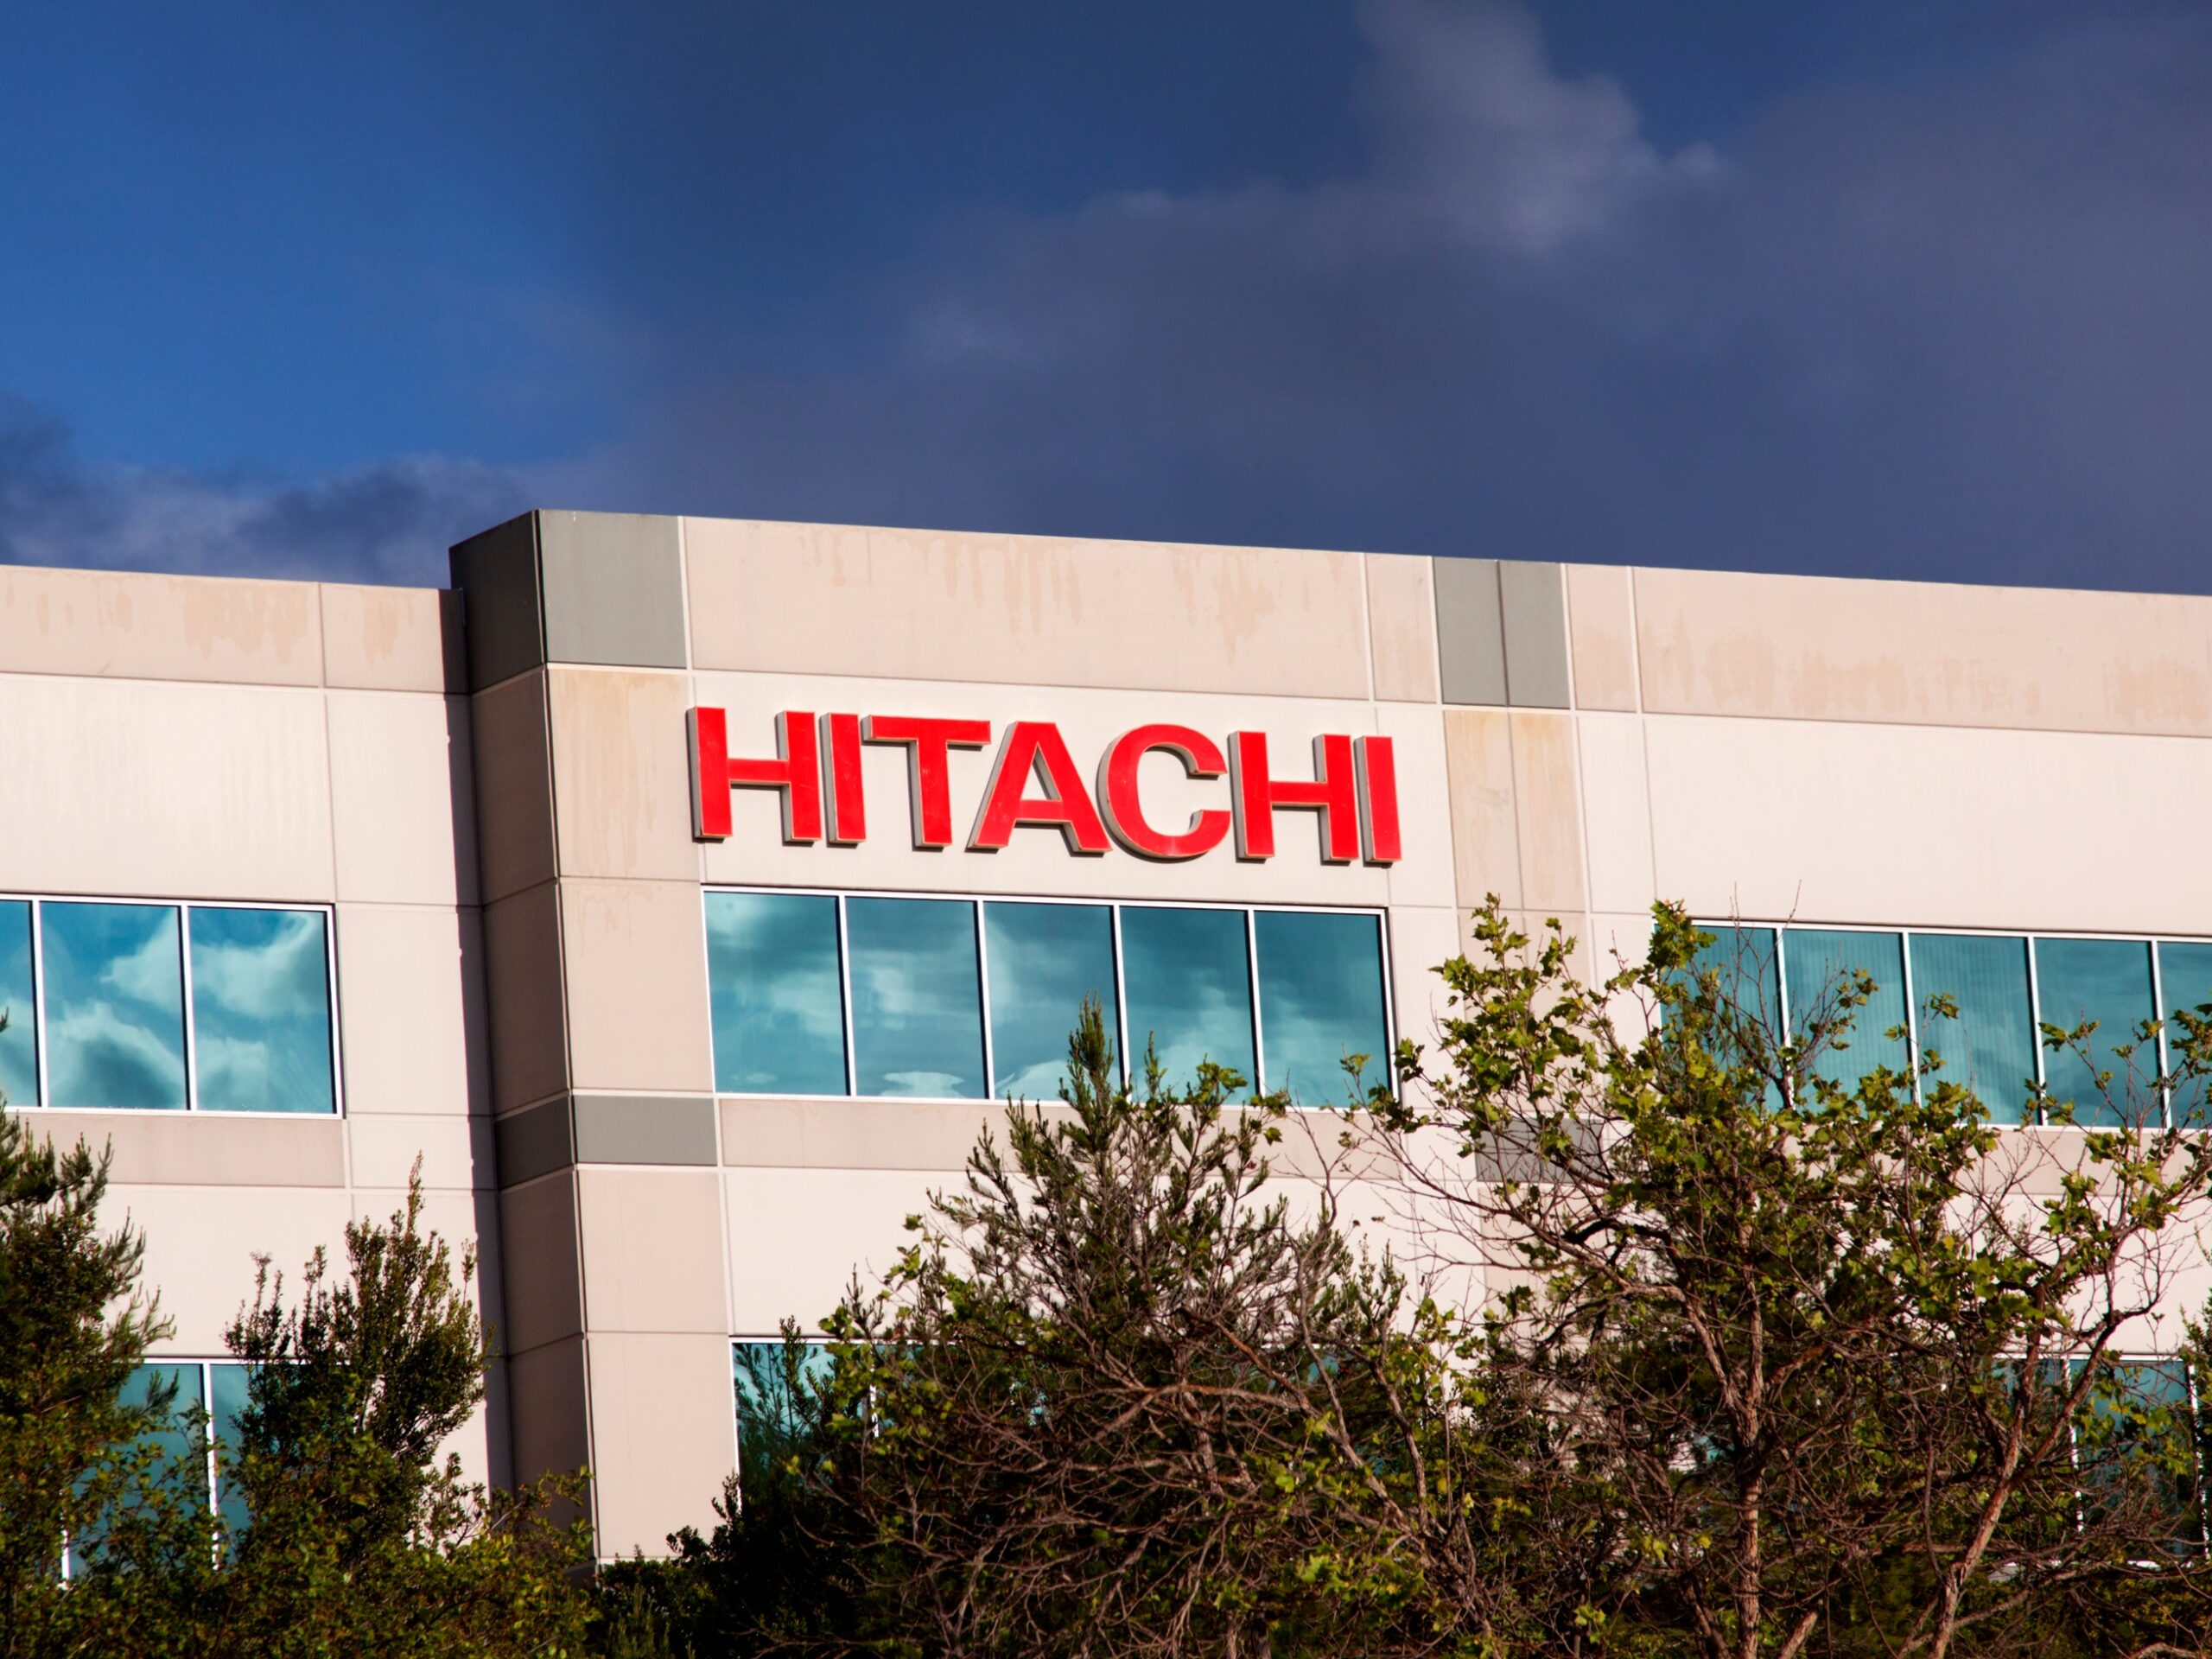 Hitachi is hiring | R&D Quality Engineer | Apply here!